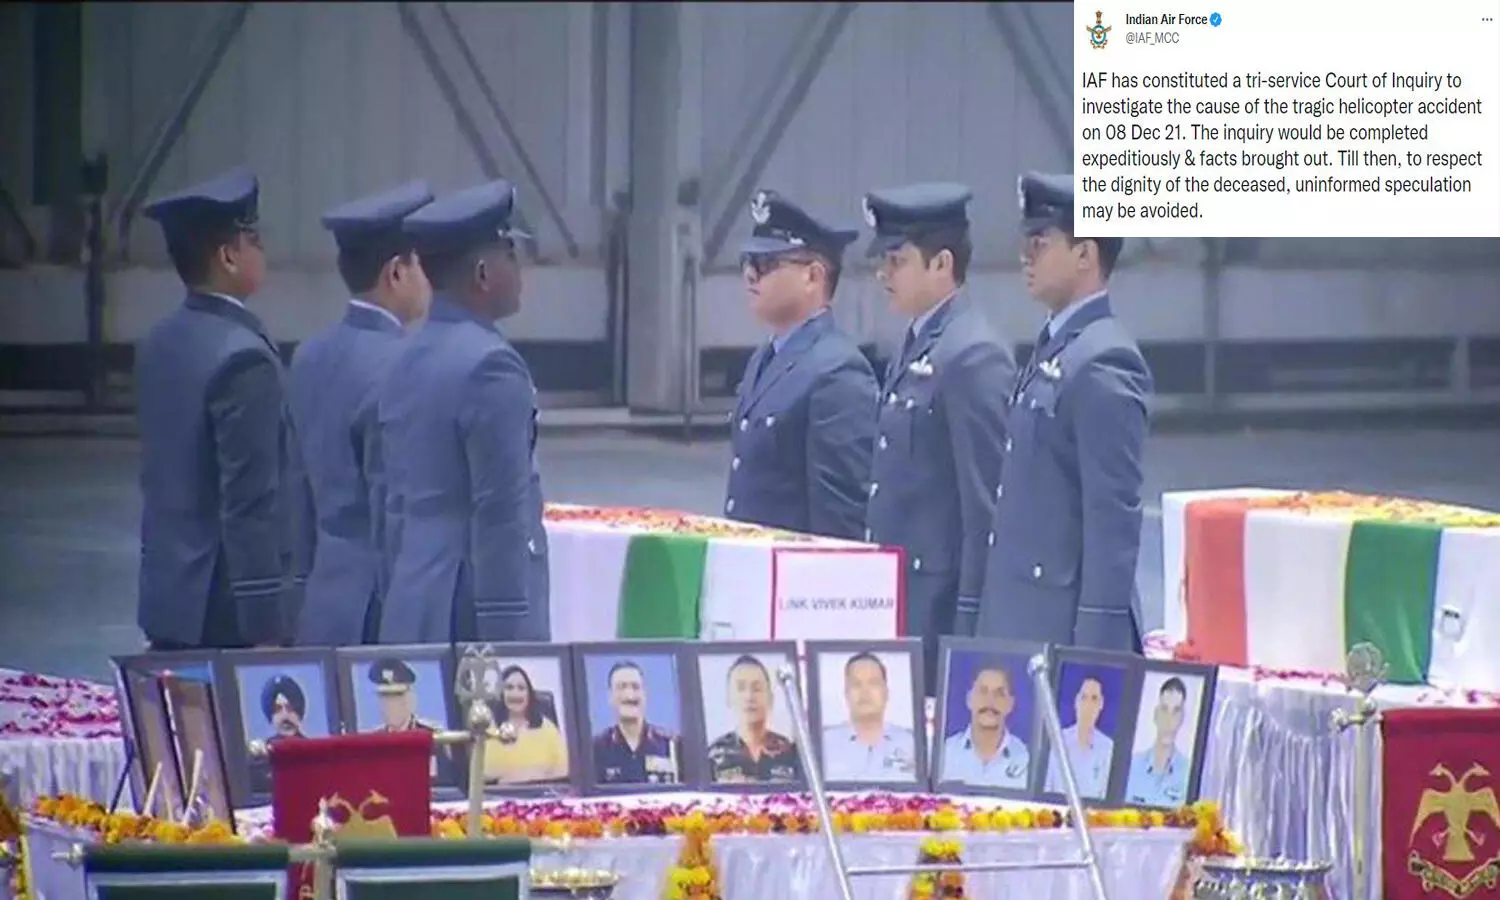 CDS Bipin Rawat Funeral: IAF tweets To respect the dignity of the deceased, avoid the rumors